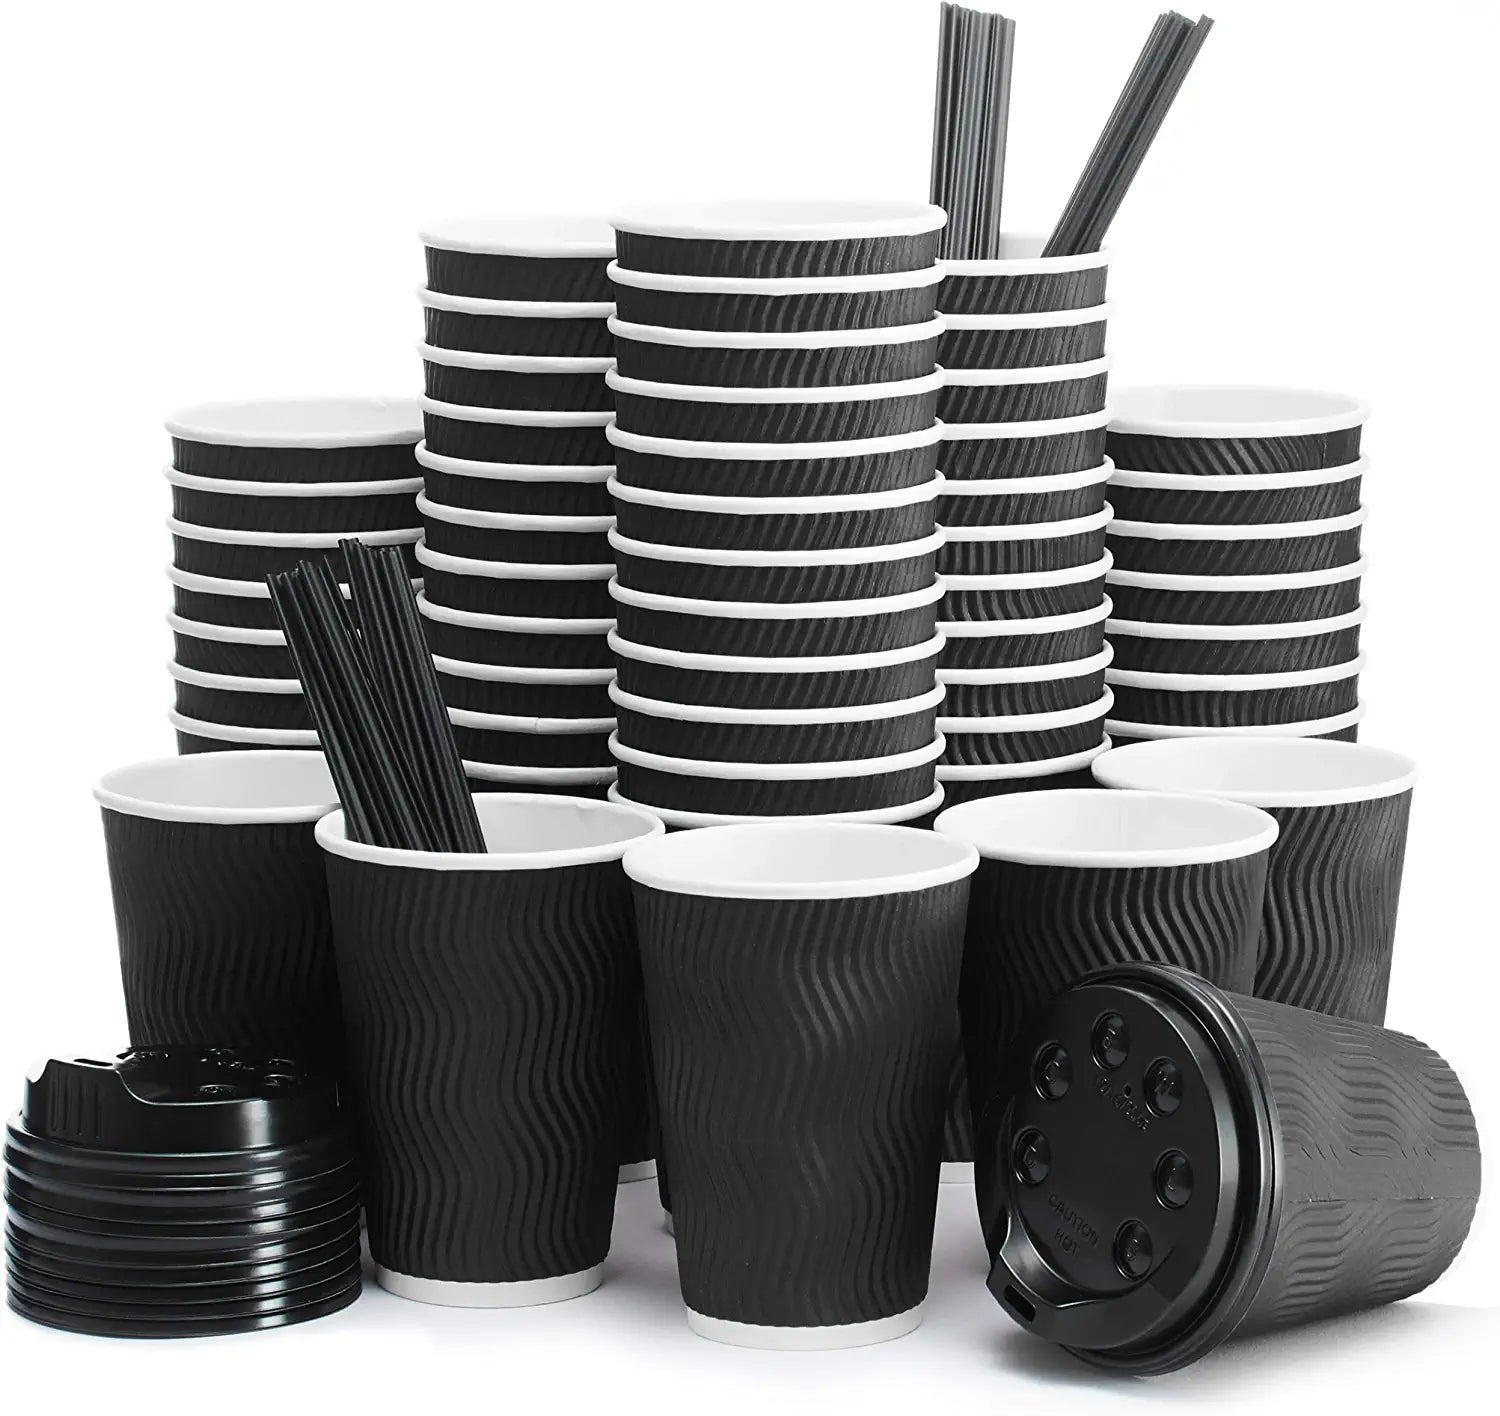 Eco-Friendly Paper Cups with Lids, Straws & Stands - 12oz Cups